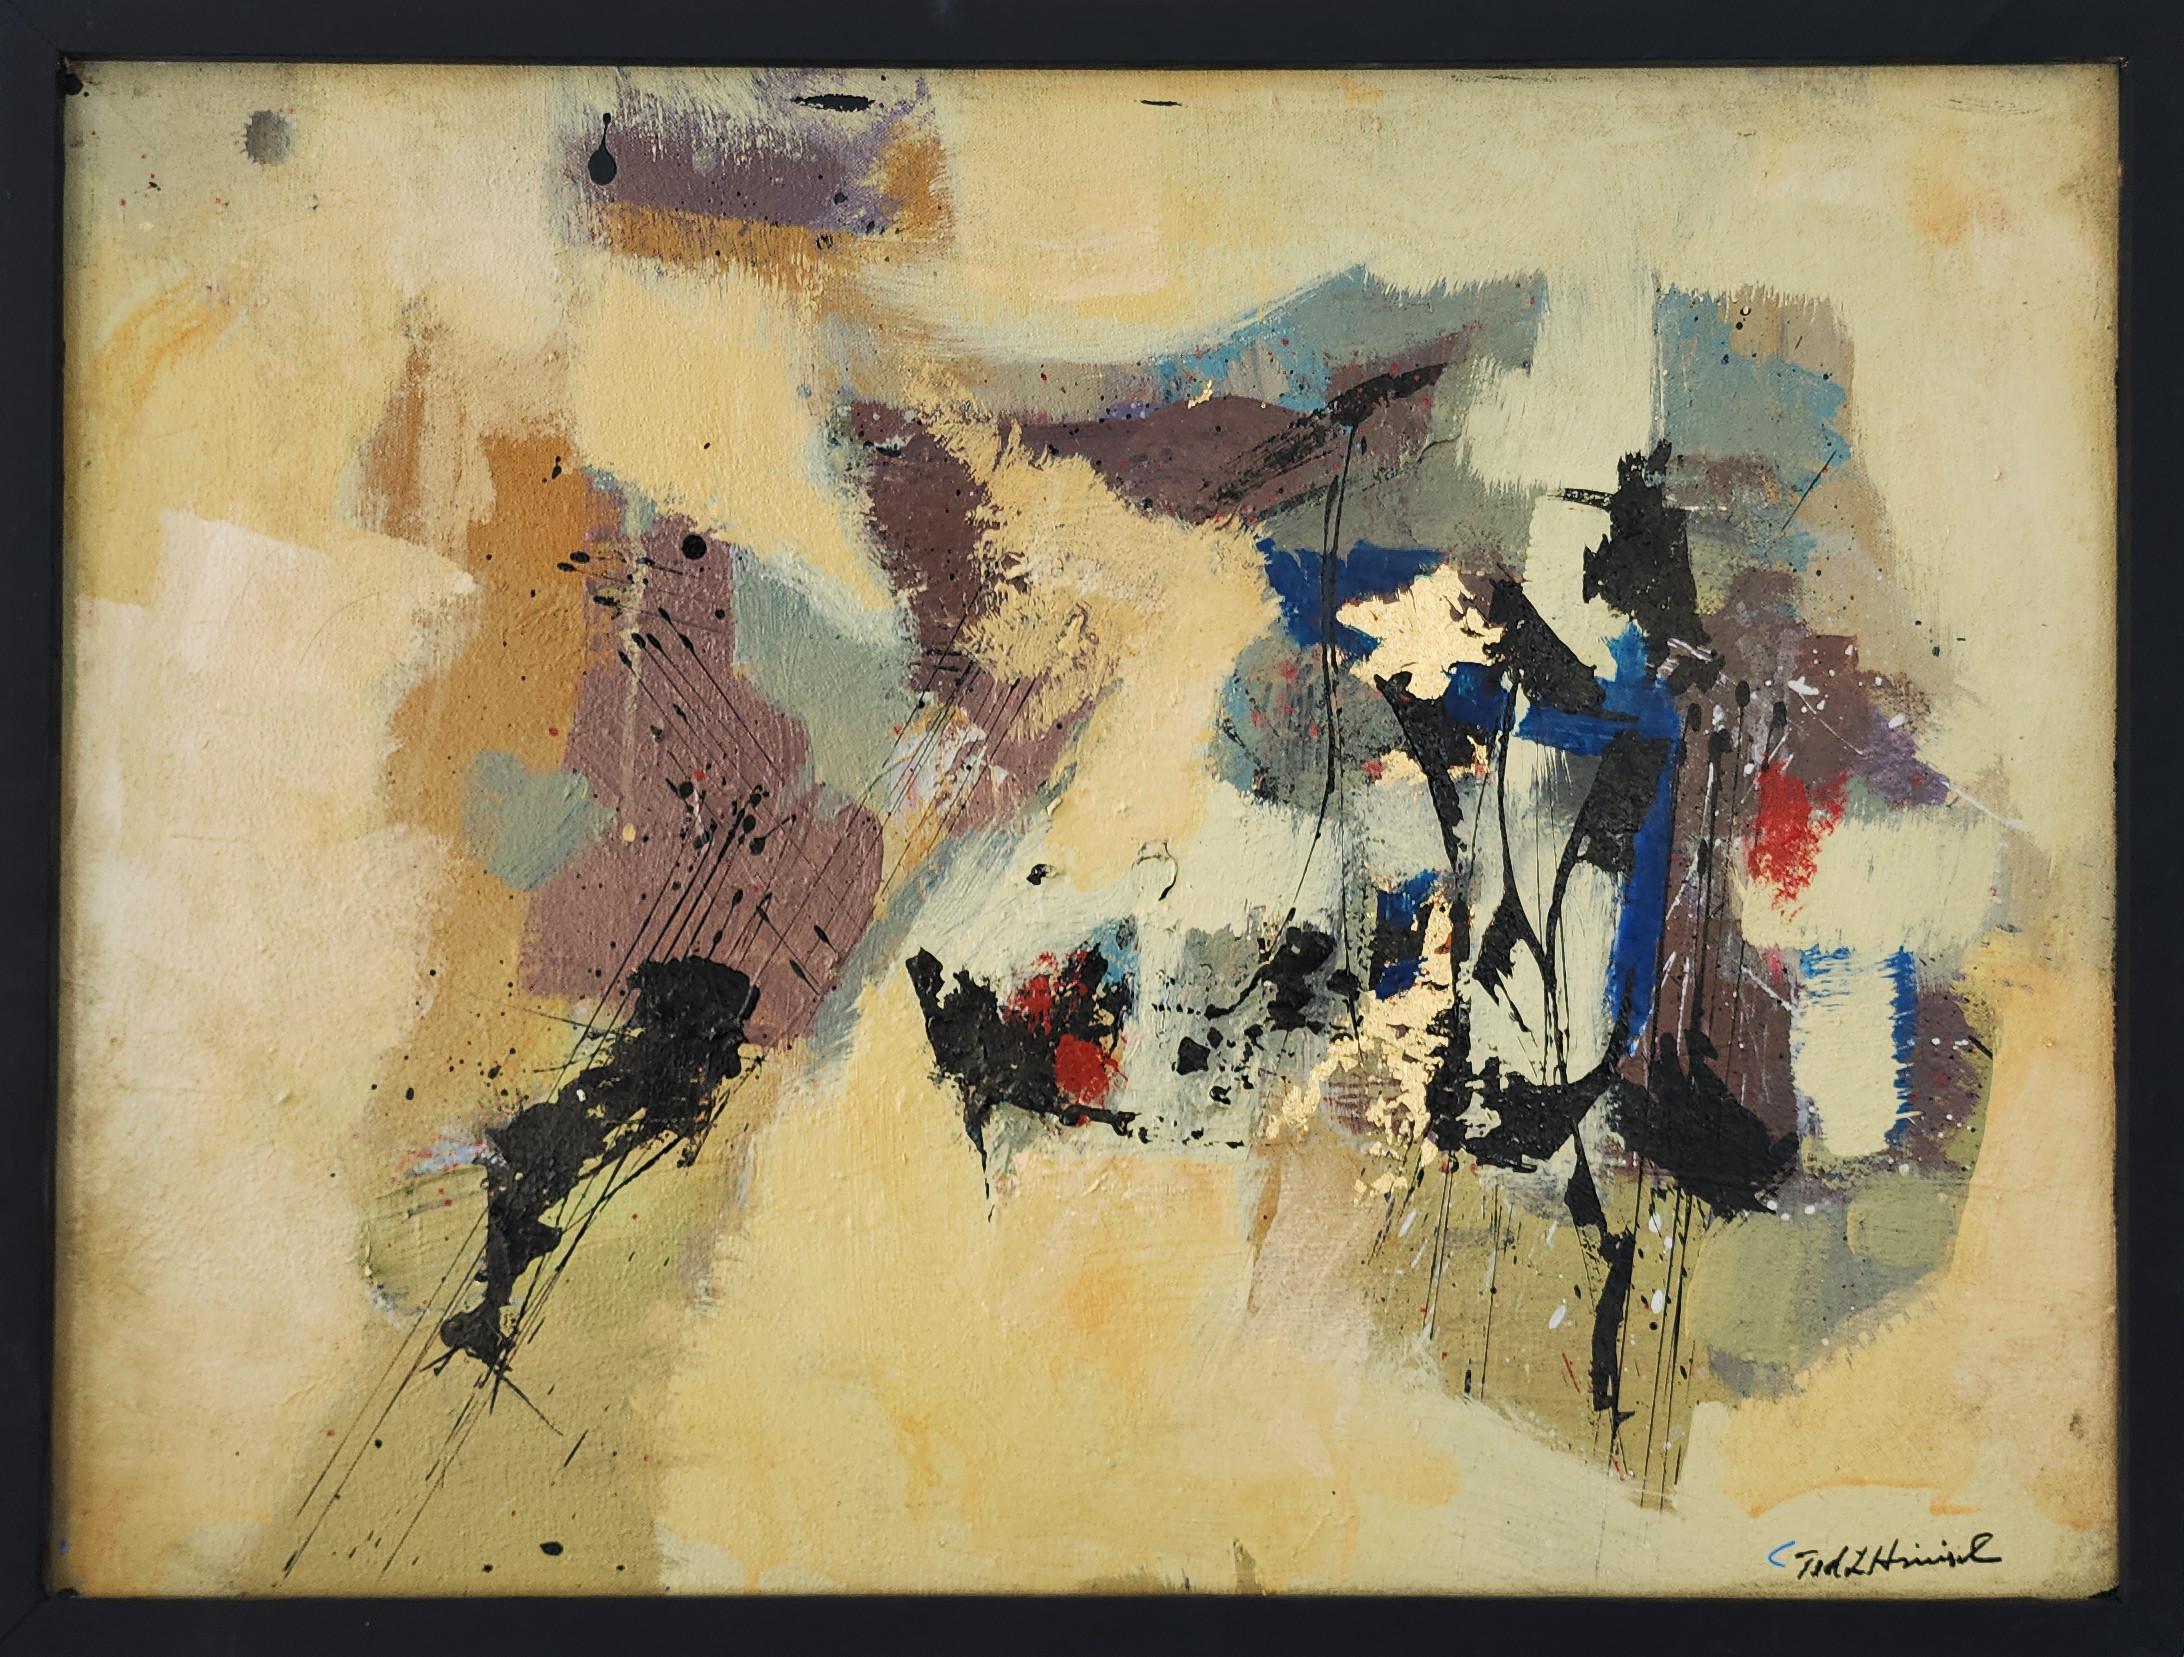 Ted Hinrichs Abstract Painting - Celestial II (Gestural Abstraction, Beige, Brown, Earth Tone, Red, Blue, Black)